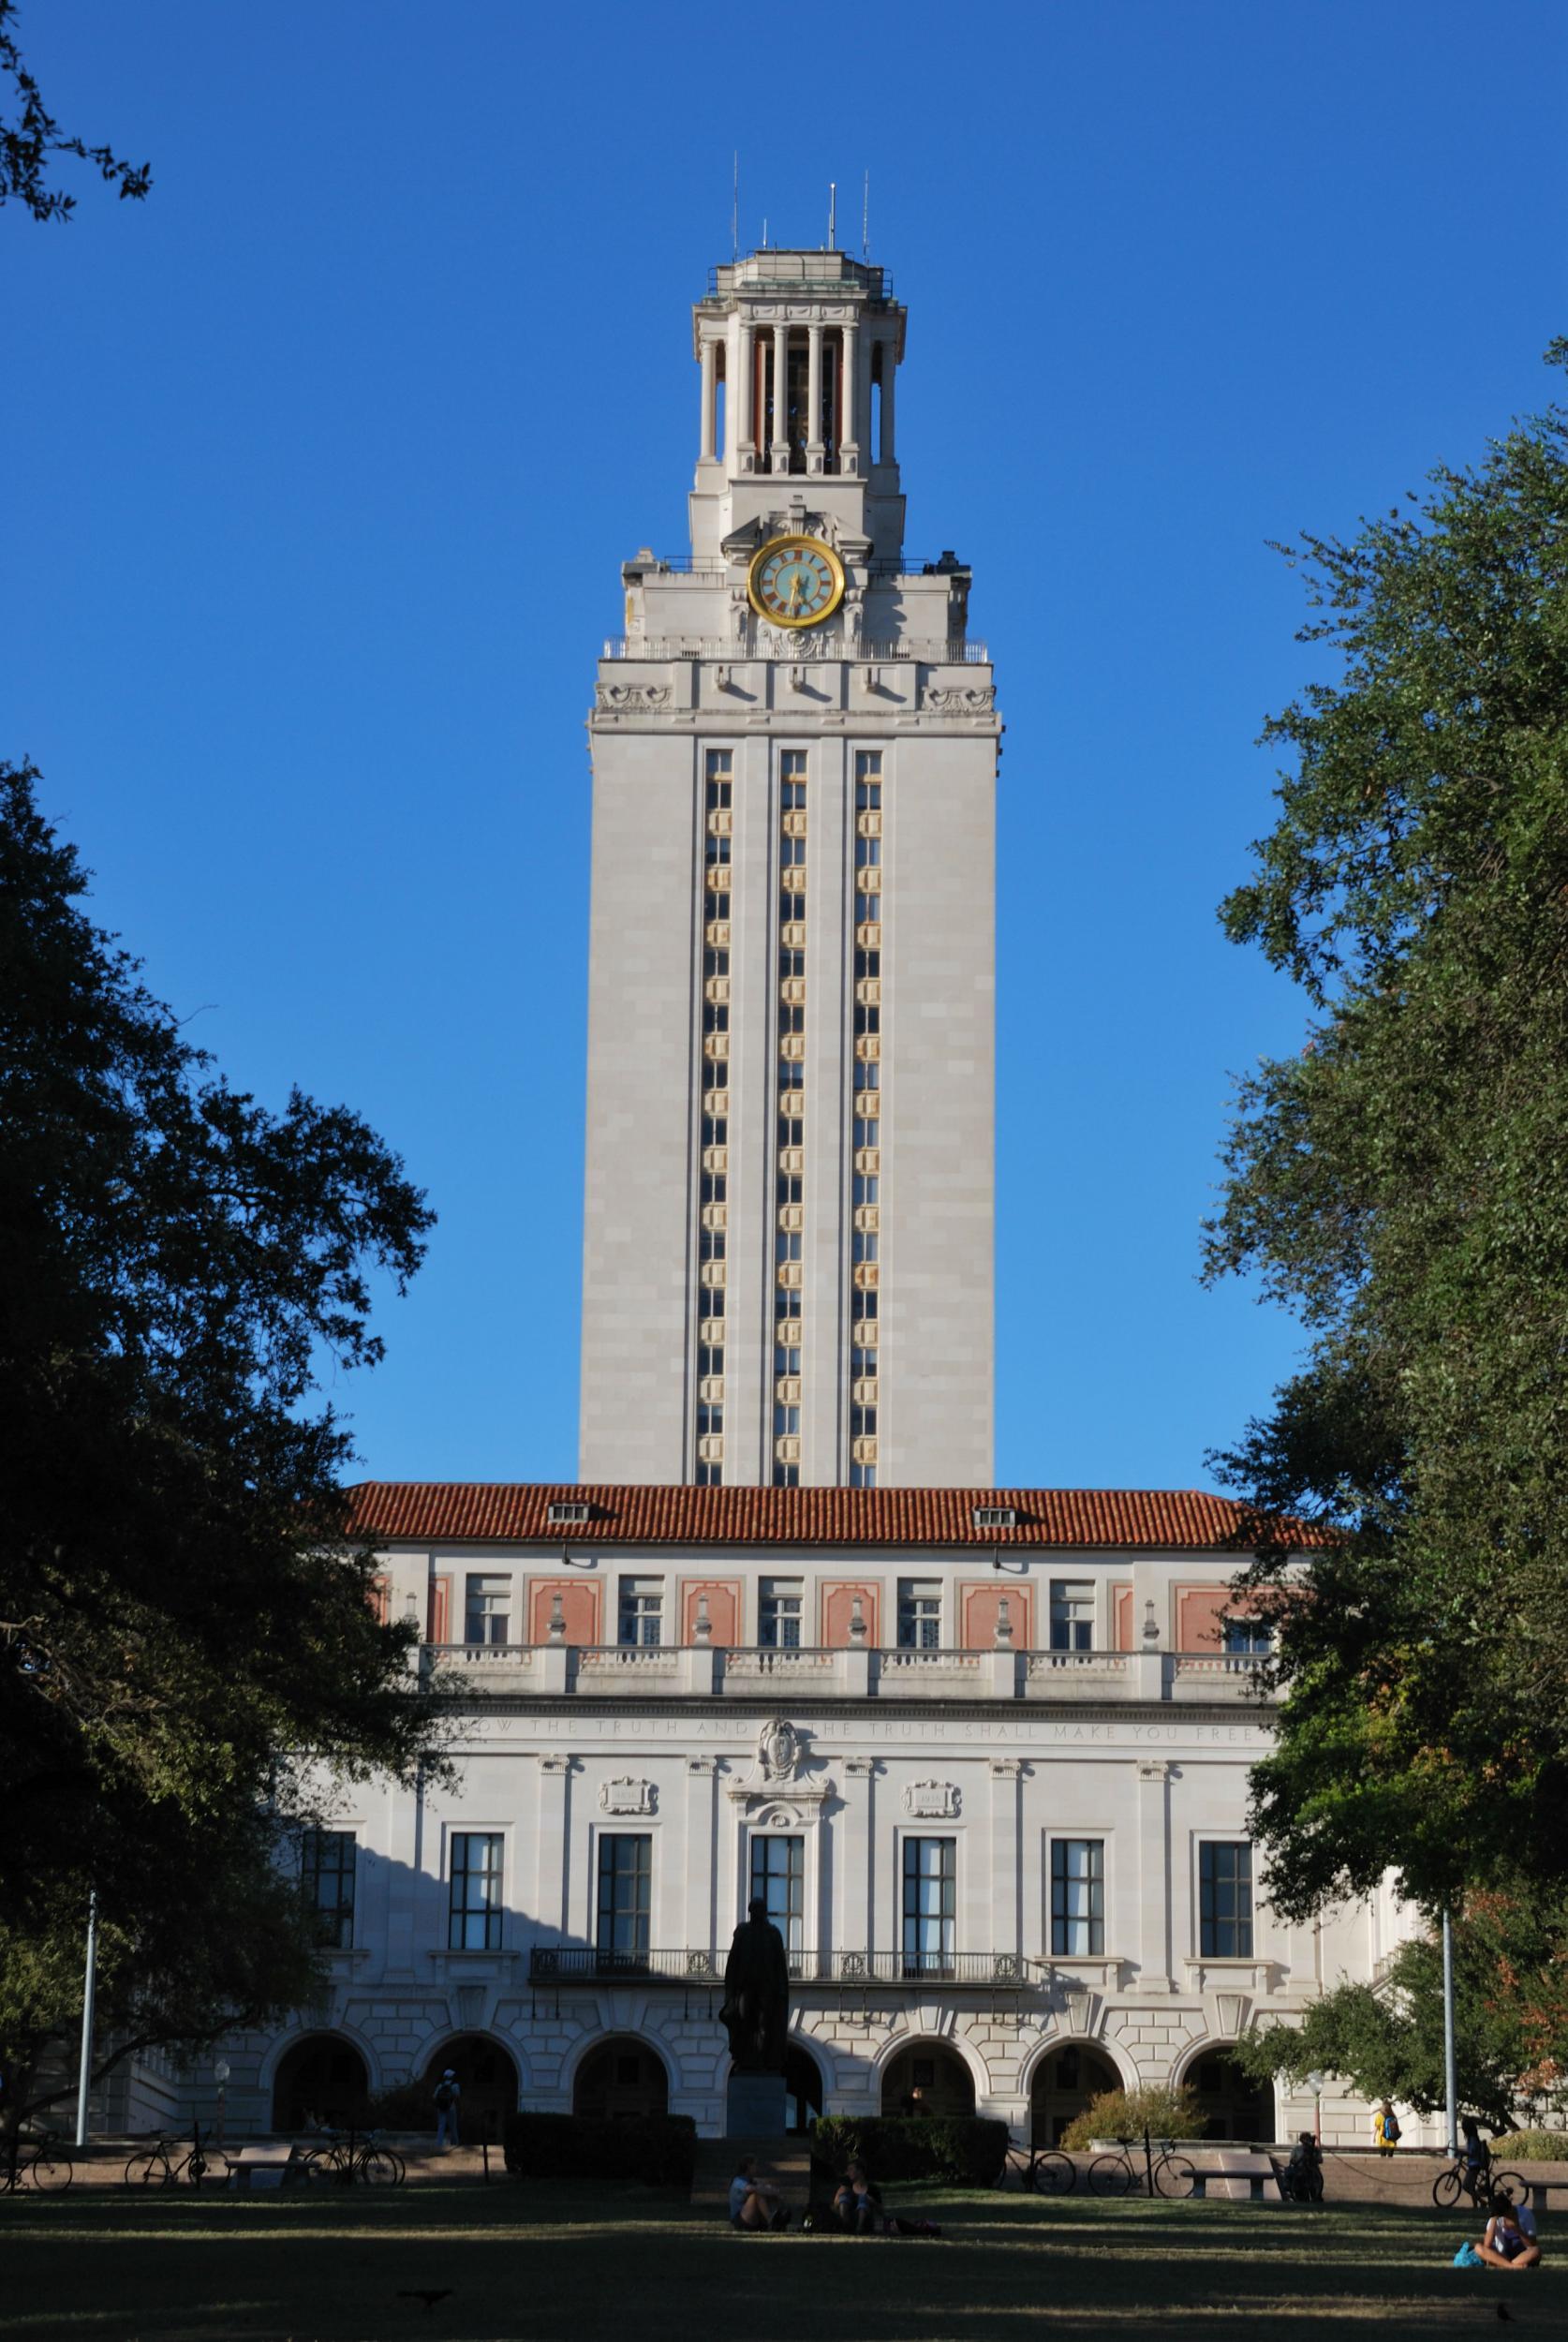 The UT tower at the heart of campus that was commandeered by the 1966 shooter